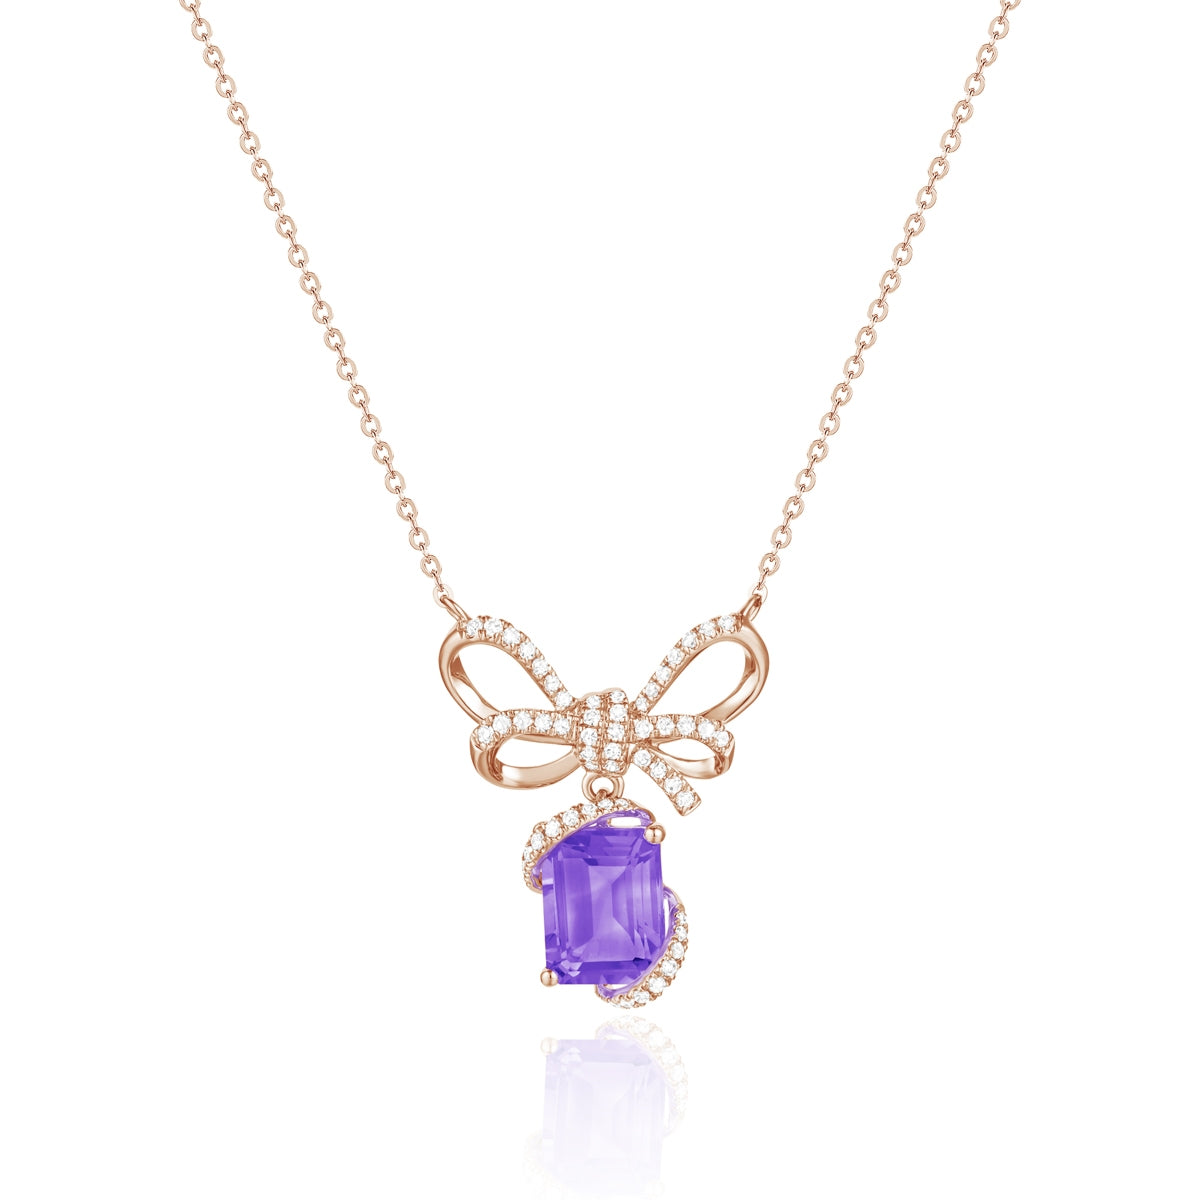 14K Rose Gold Gift Necklace with Amethyst